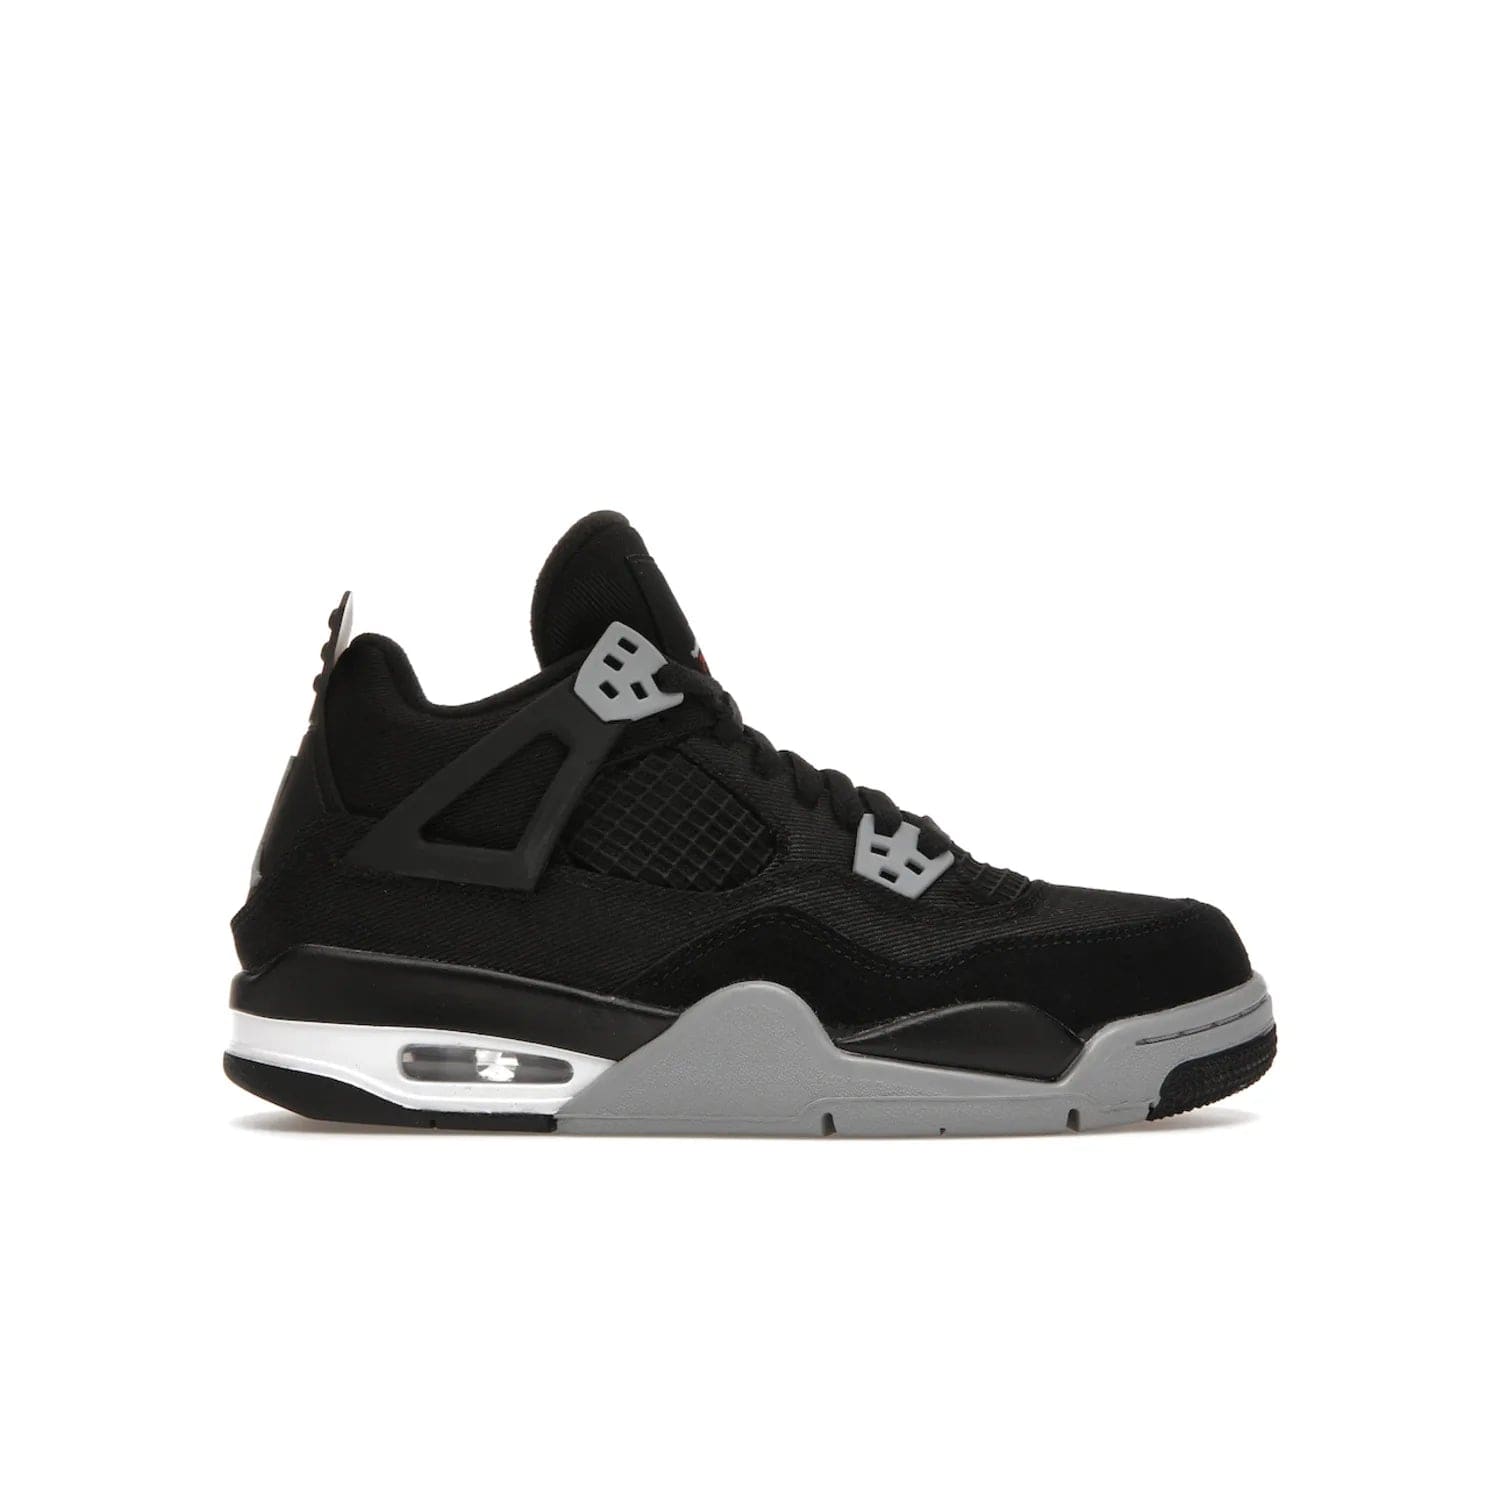 Jordan 4 Retro Black Canvas (GS) - Image 1 - Only at www.BallersClubKickz.com - Premium Air Jordan 4 Retro Black Canvas in grade-schooler's catalog. Featuring black suede canvas upper, grey molding, accents in red, white midsole, woven Jumpman tag, & visible AIR cushioning. Releasing Oct. 1, 2022.